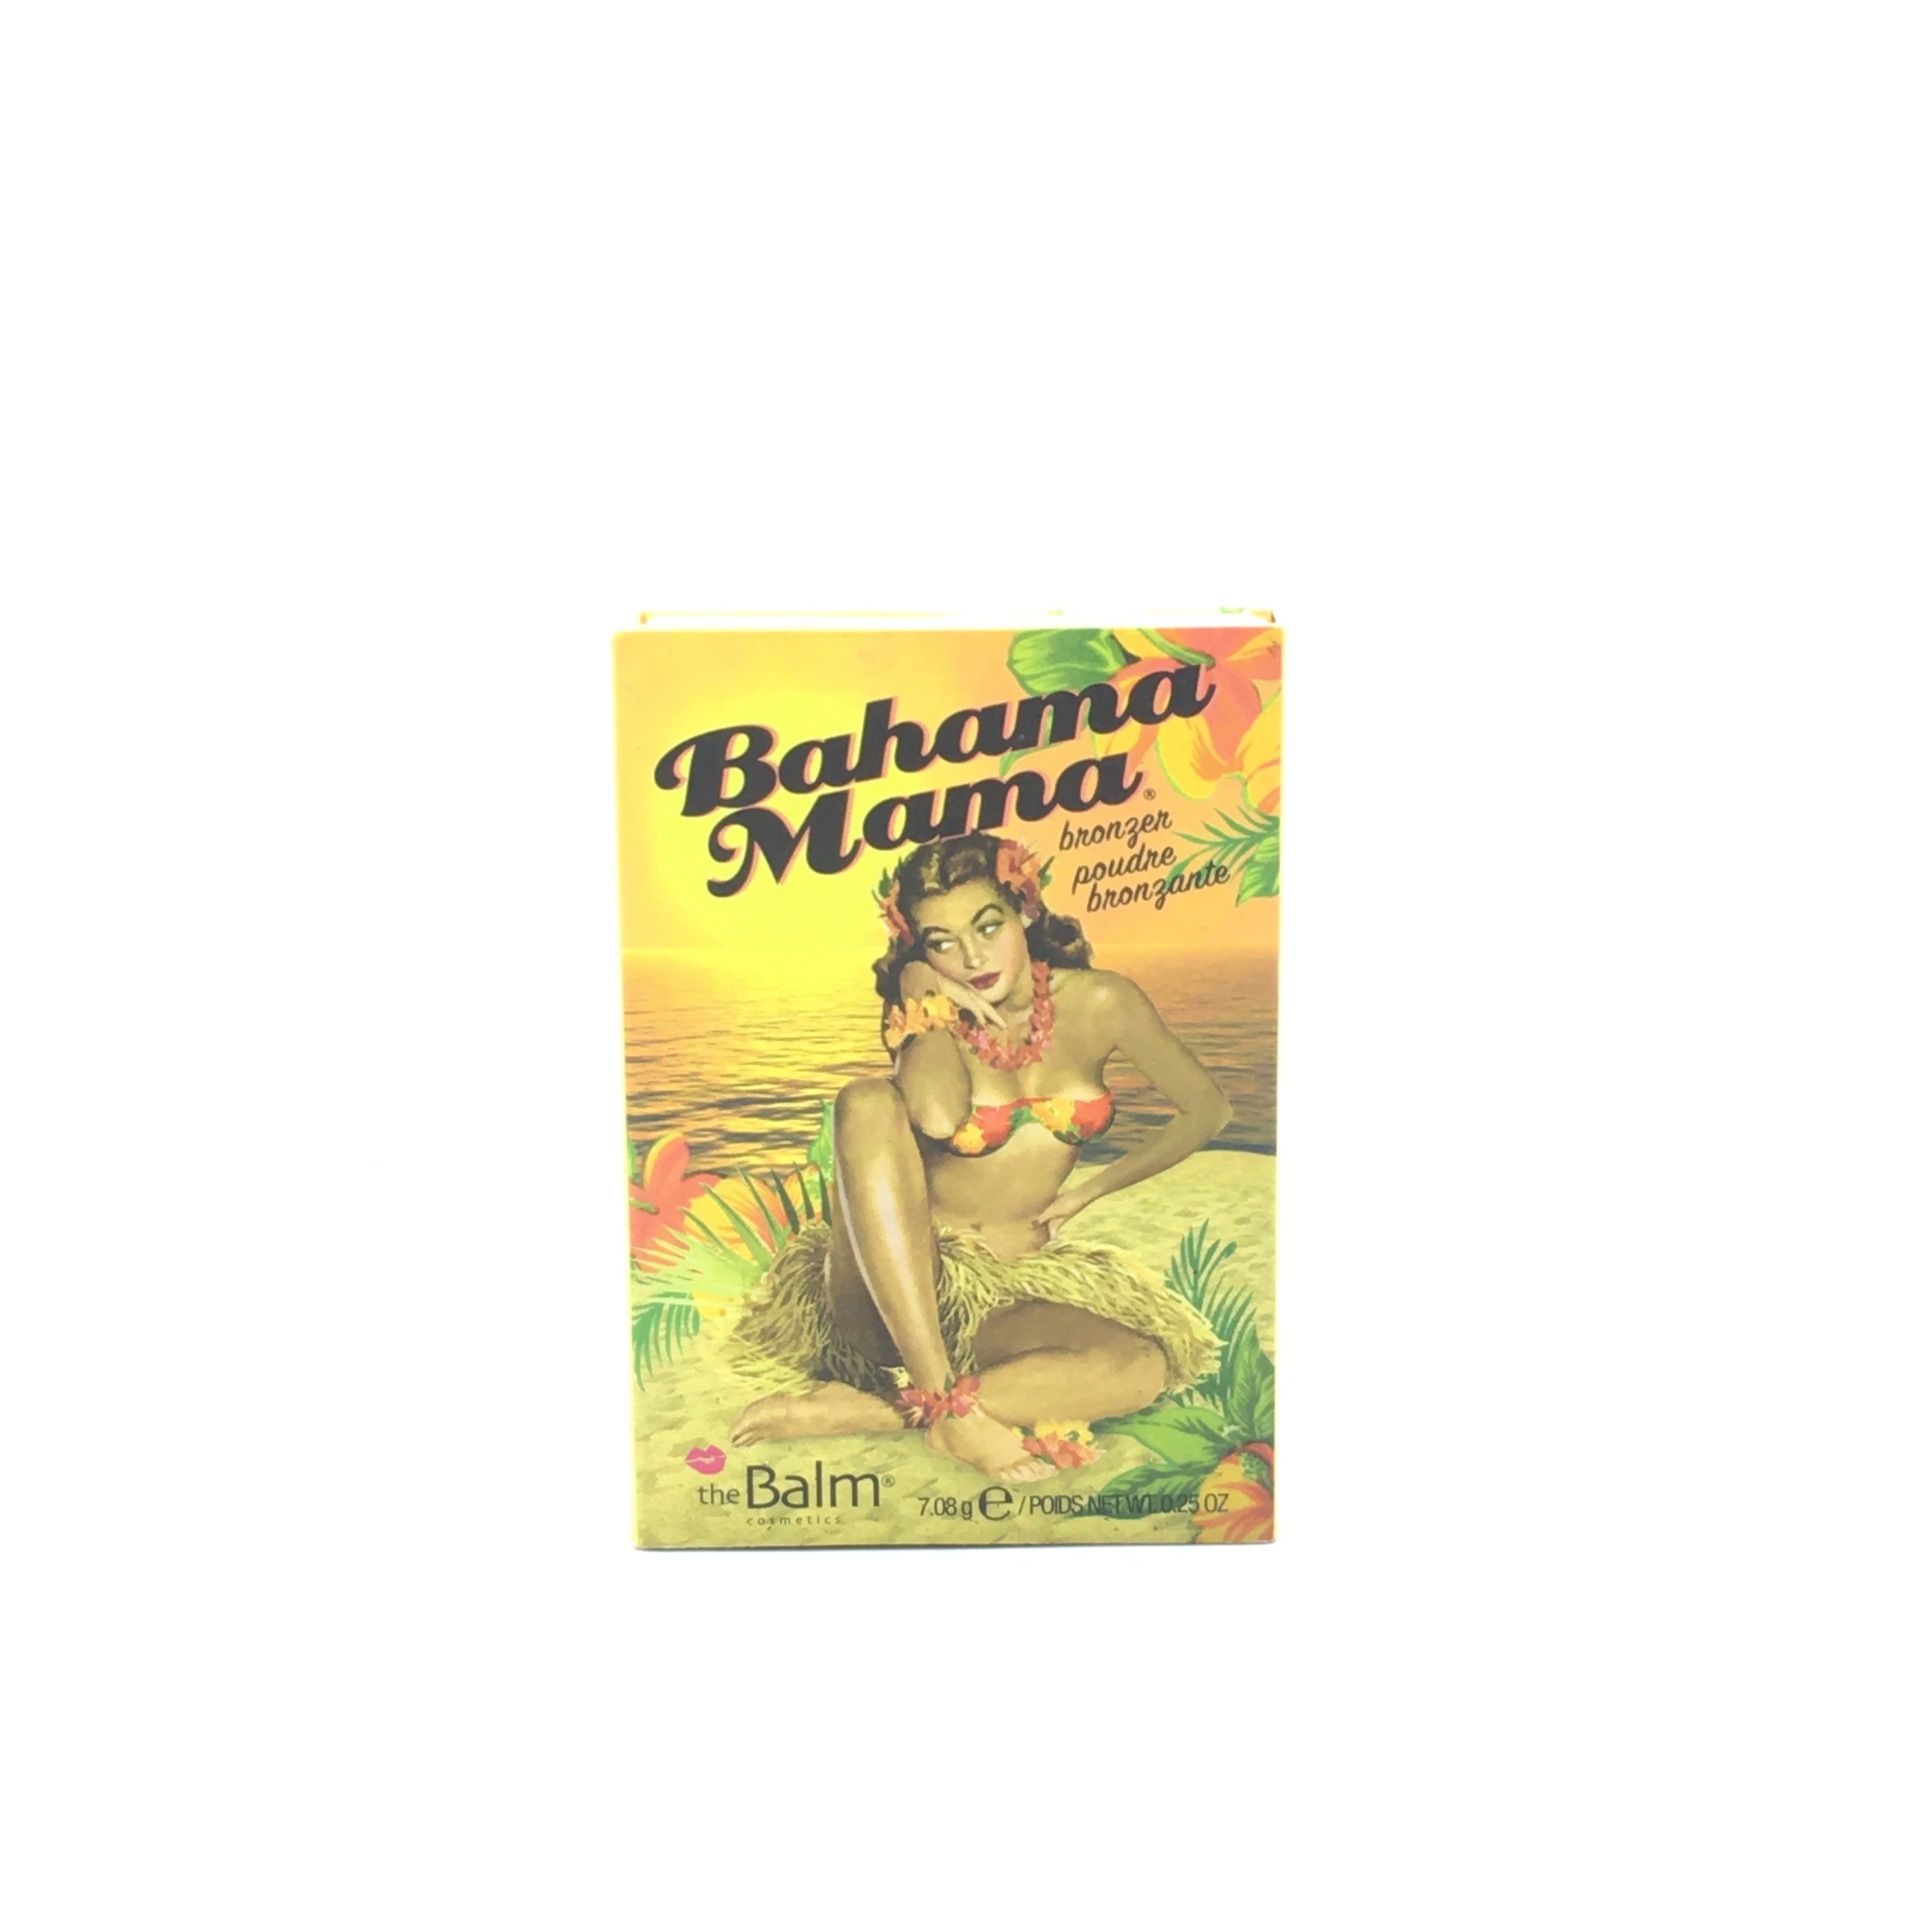 The Balm Bahama Mama Bronzer Sets and Palette